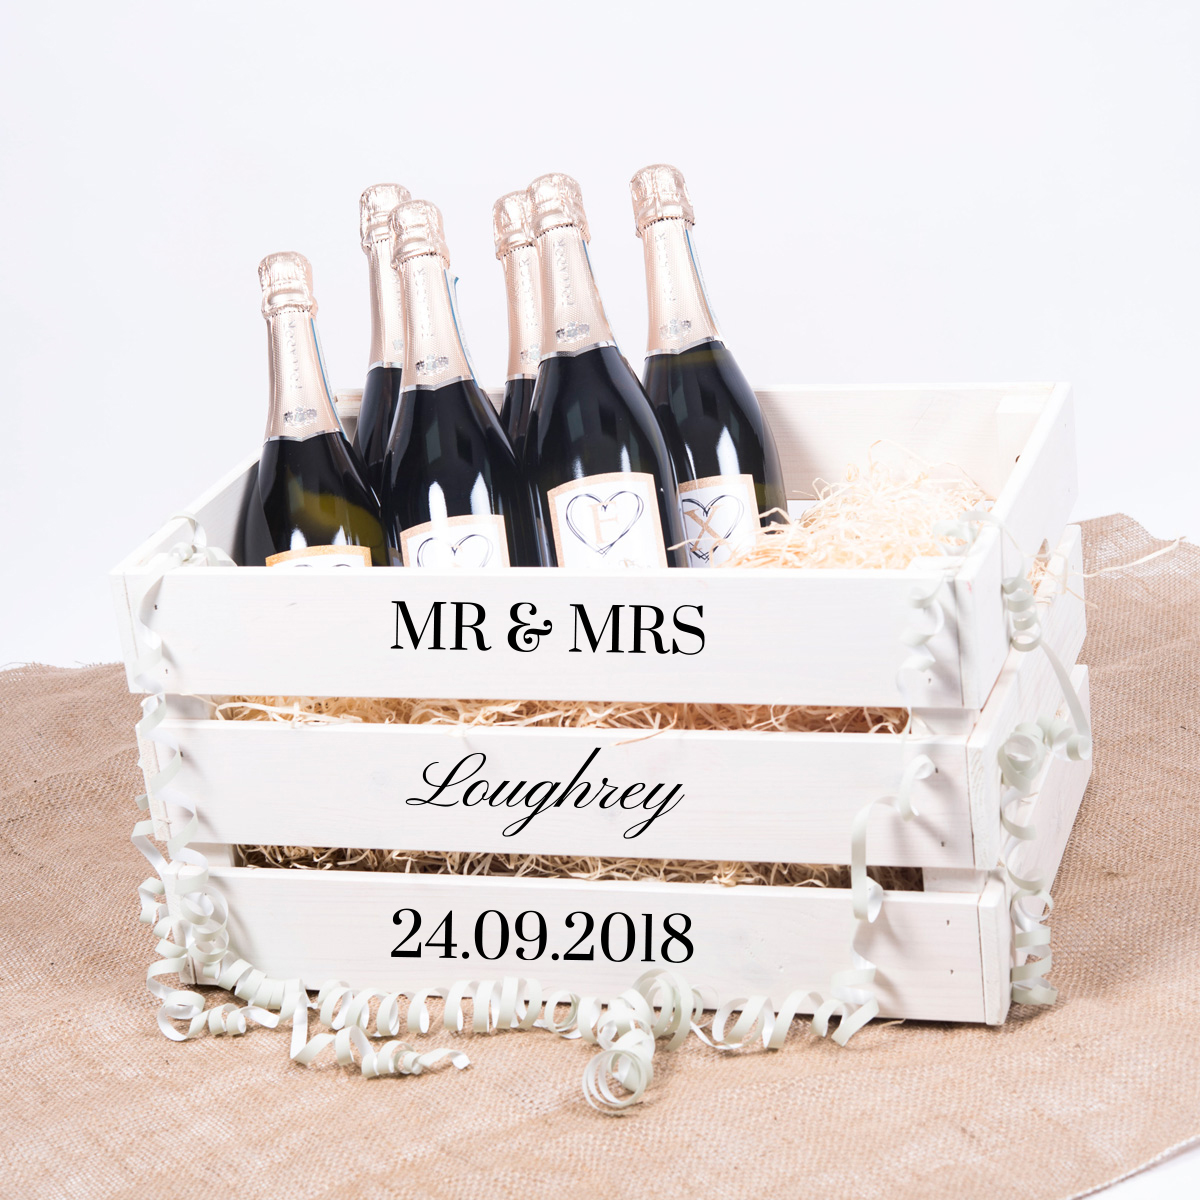 Personalised Large Wooden Crate - Wedding